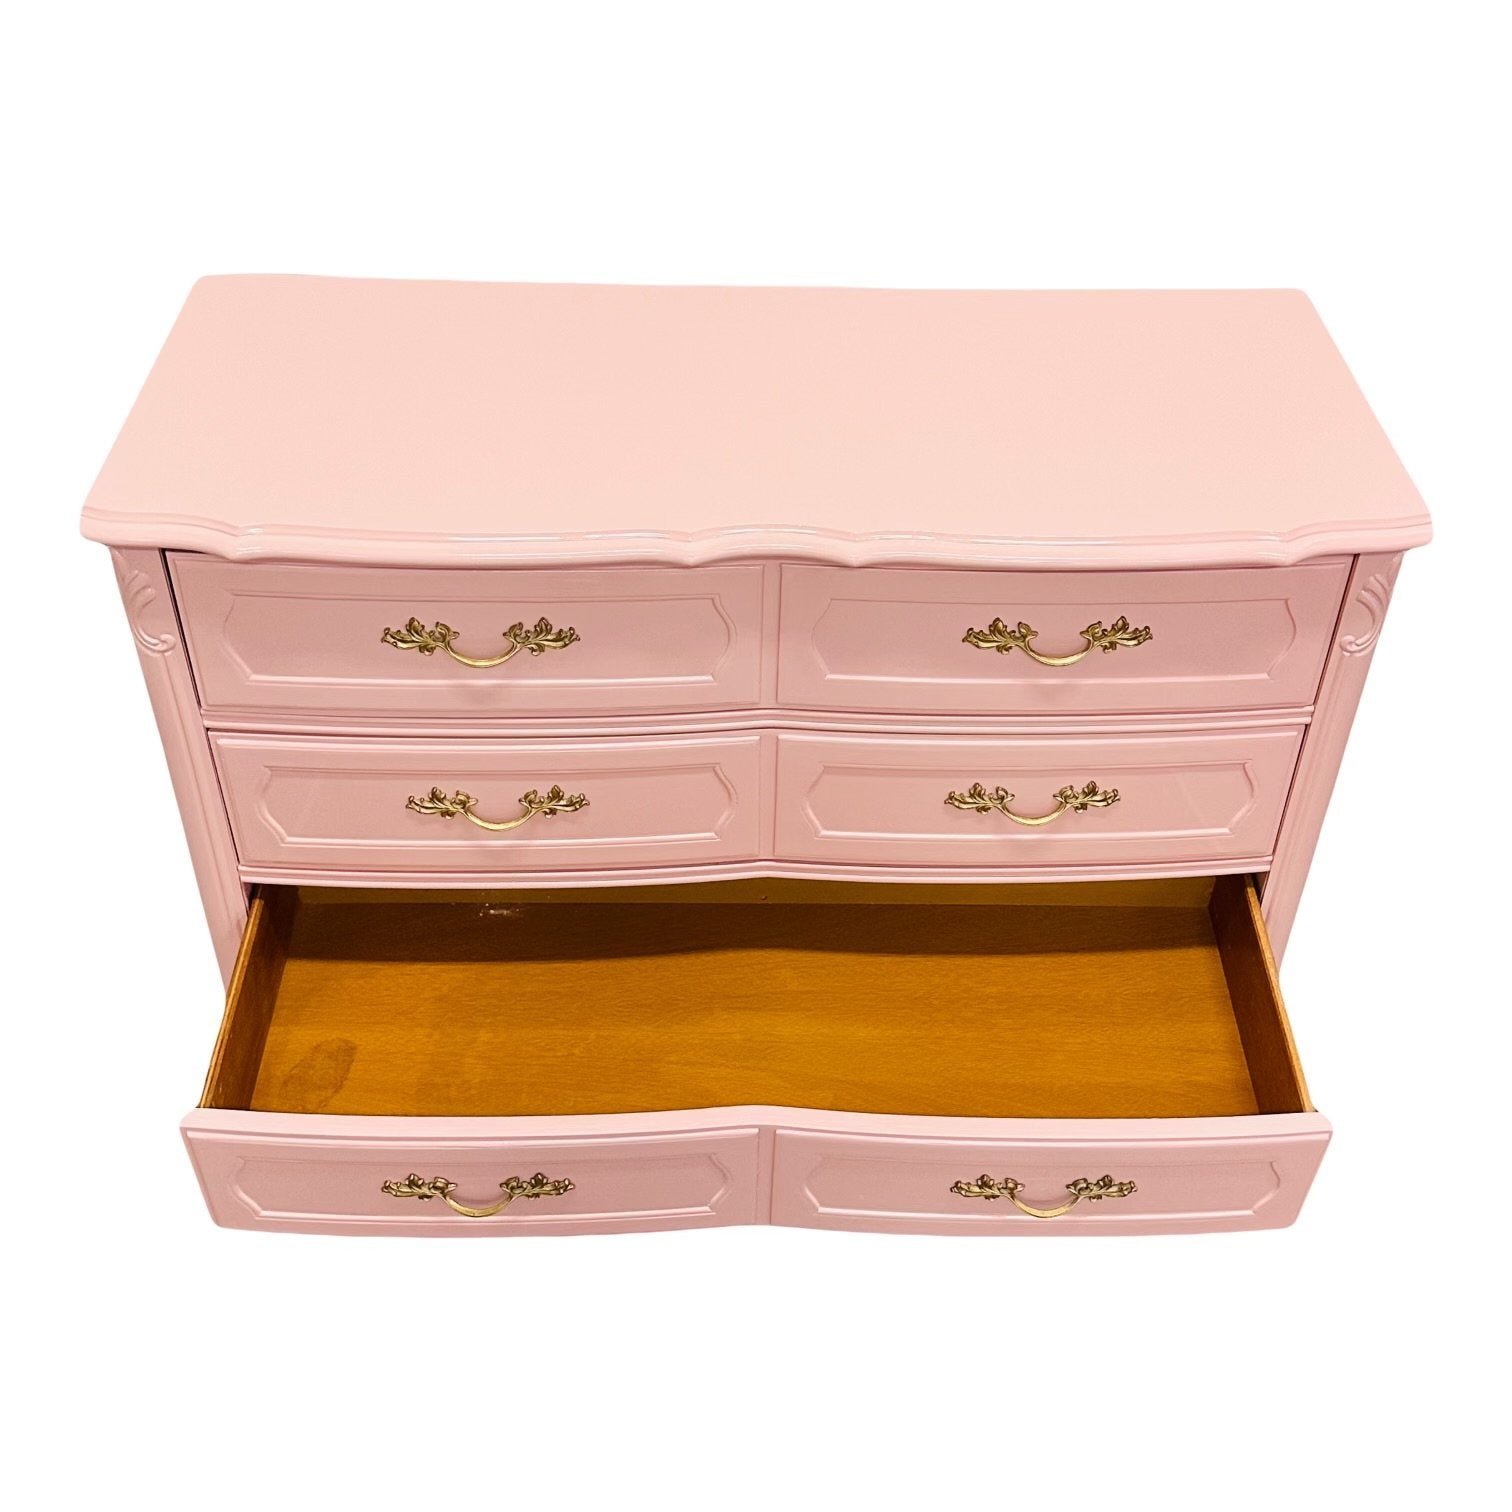 SOLD: French Provincial Dresser in Unspoken Love by Benjamin Moore